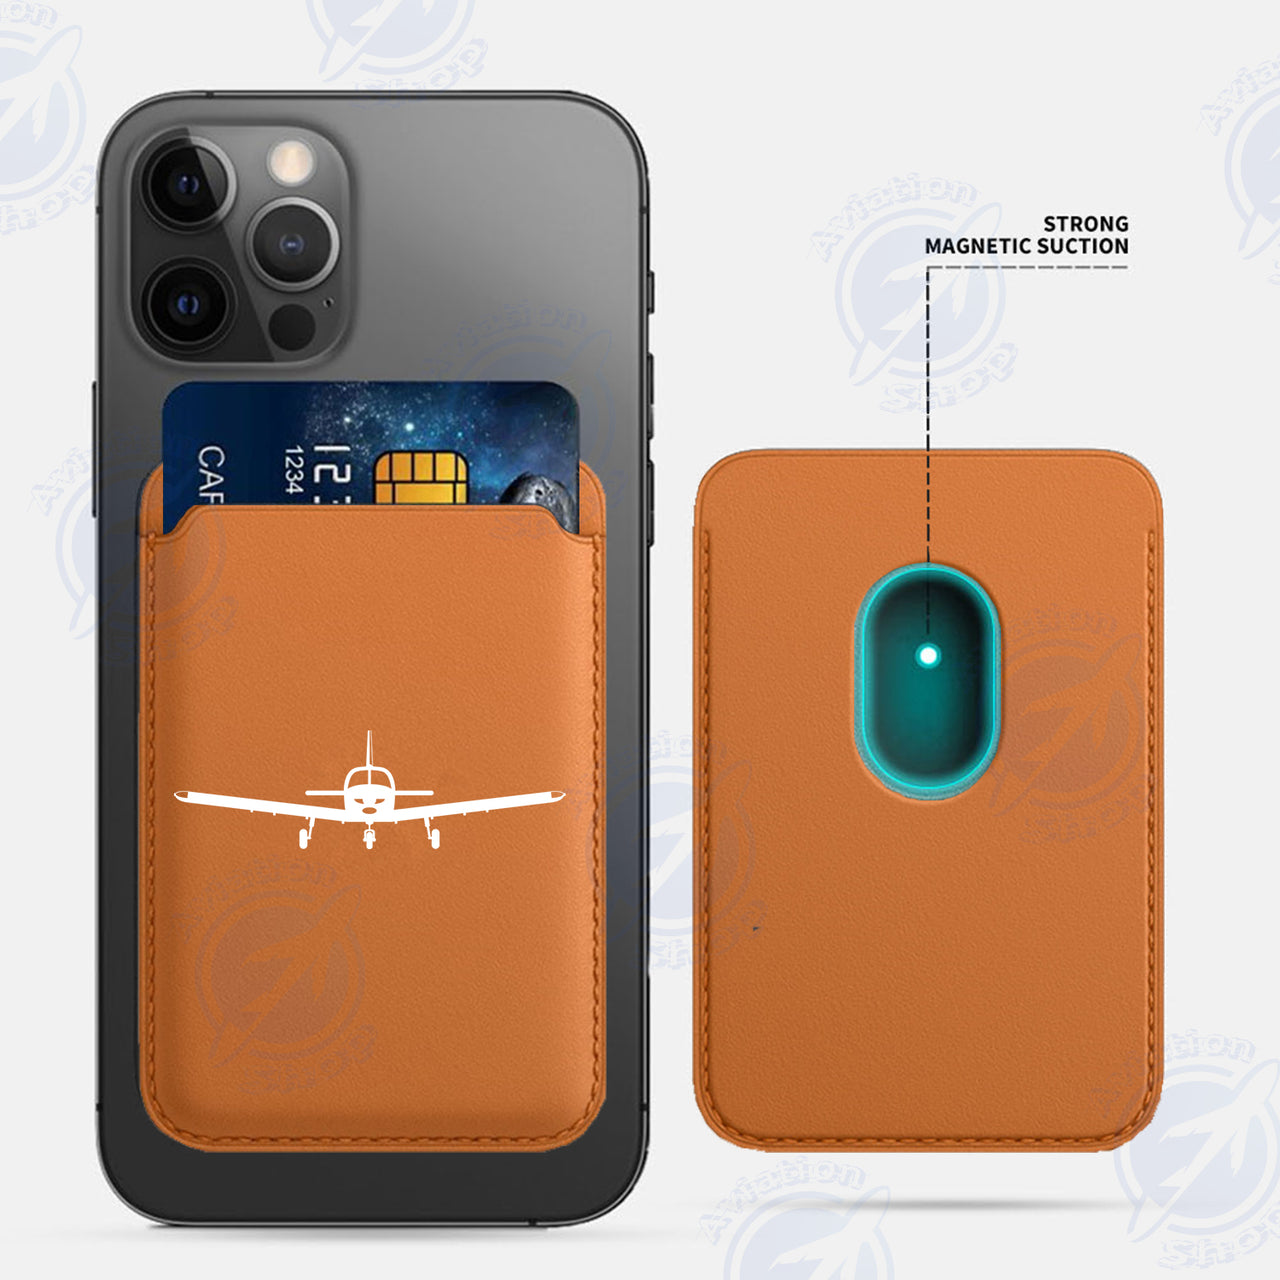 Piper PA28 Silhouette Plane iPhone Cases Magnetic Card Wallet